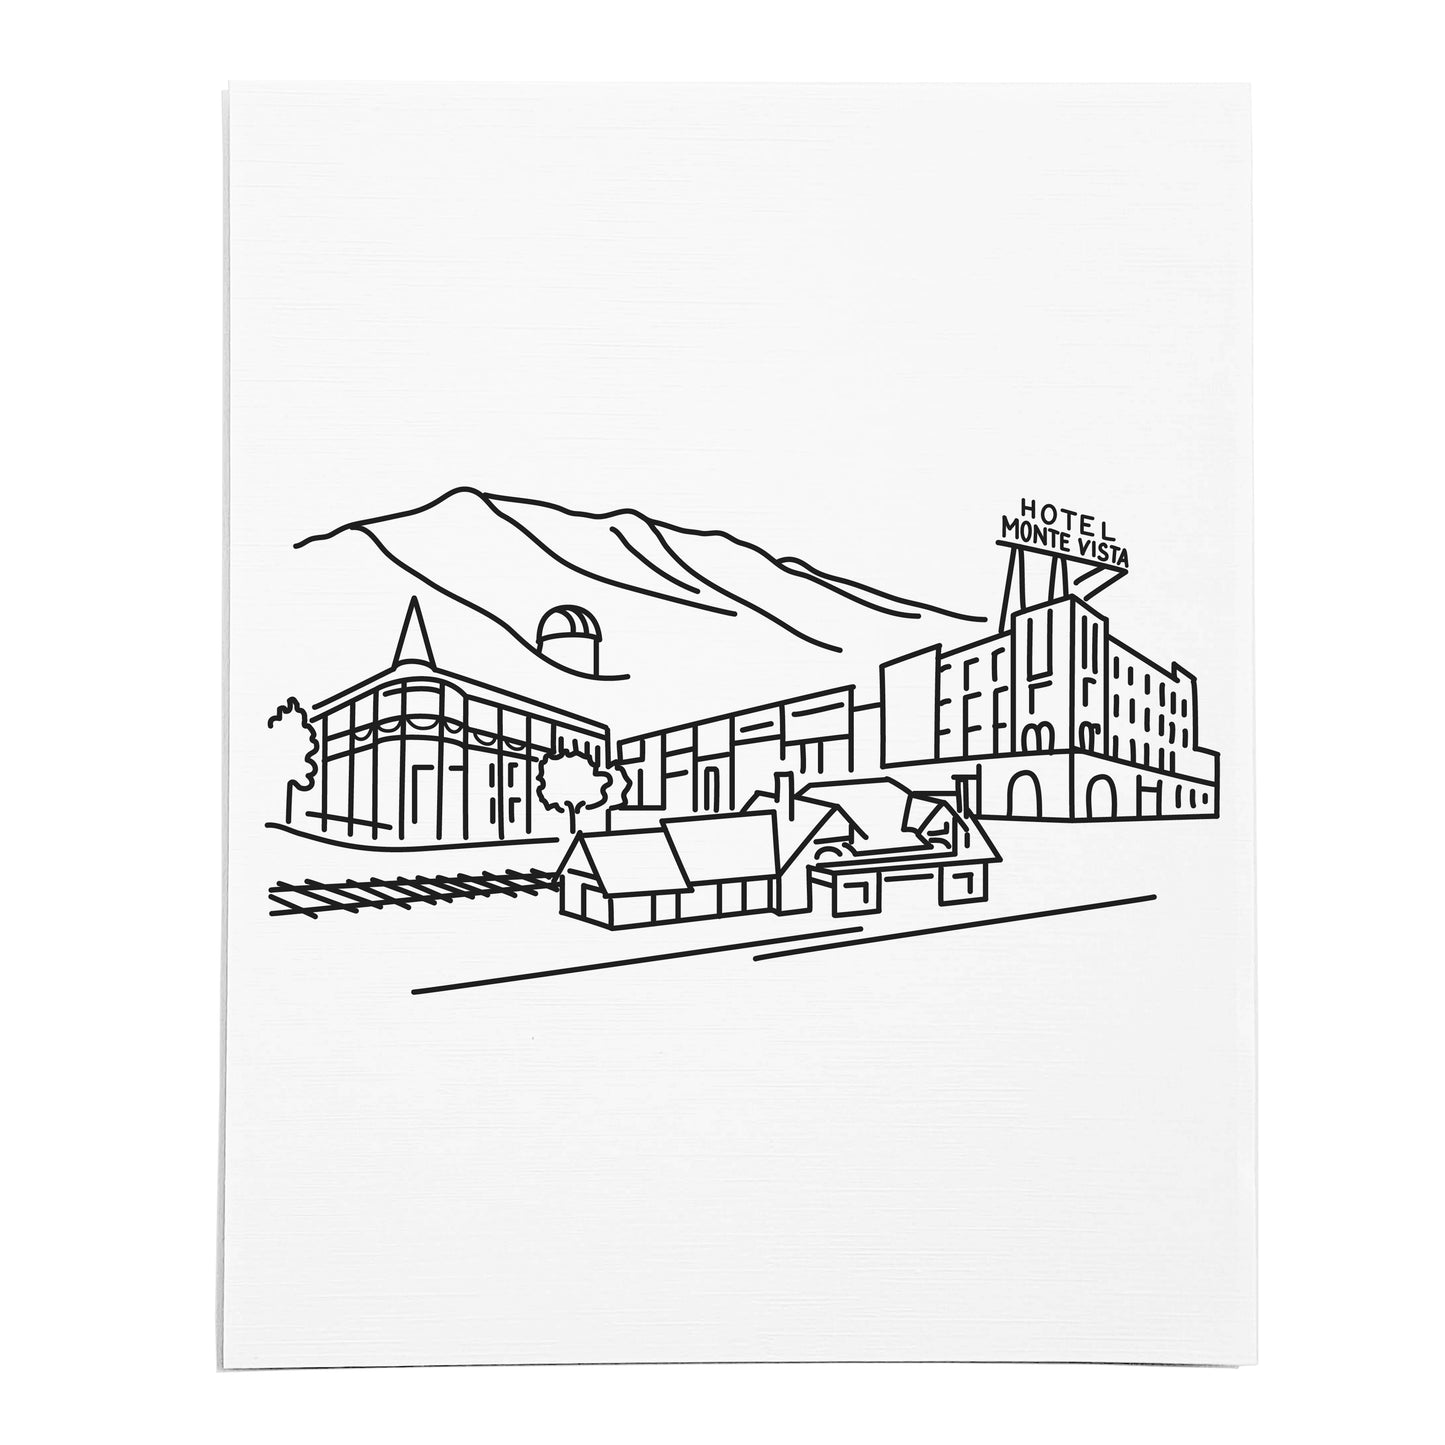 An art print featuring a line drawing of the Flagstaff Skyline on white linen paper